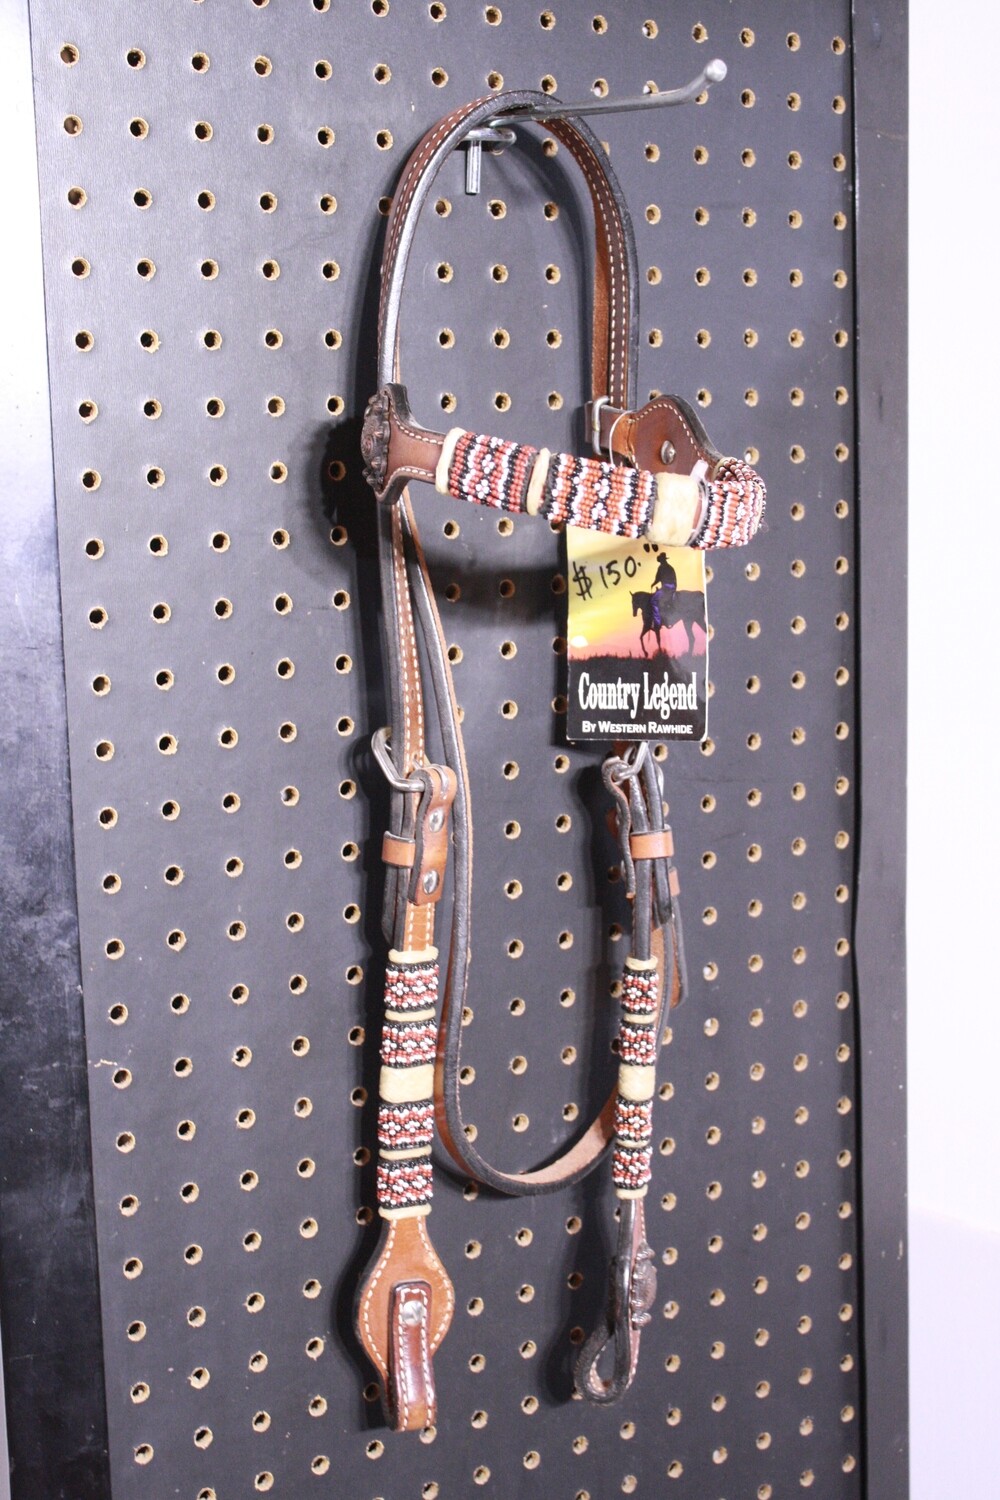 Country Legend Browband HS Chesnut, Black/White/Red Beads